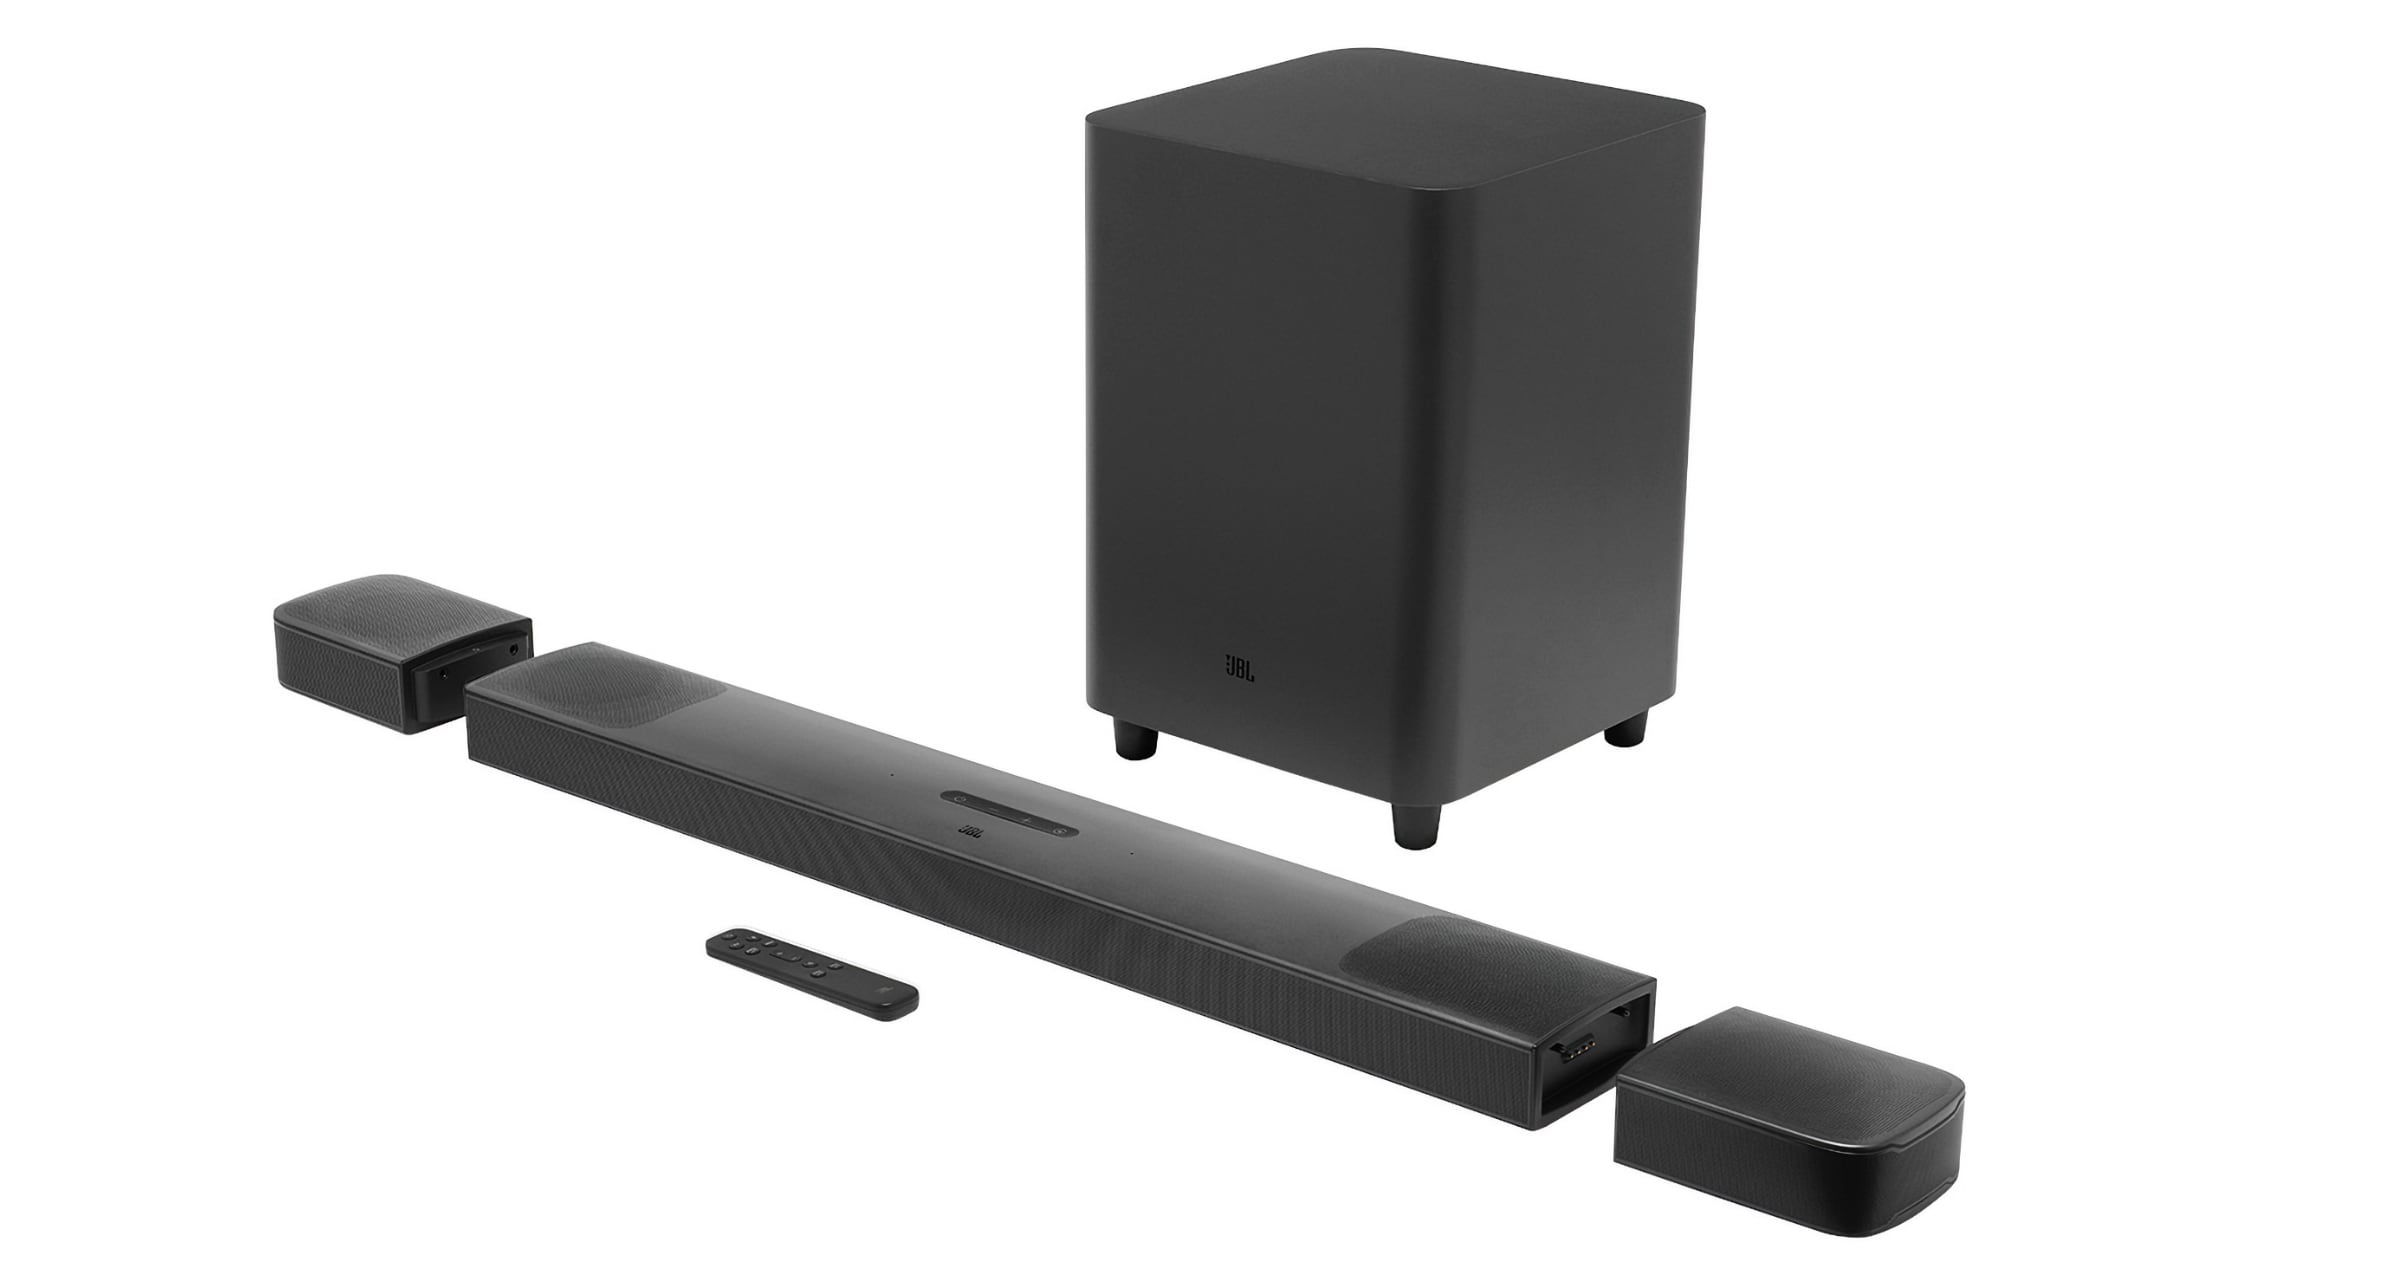 JBL's first Dolby soundbar also features AirPlay 2, Chromecast - FlatpanelsHD